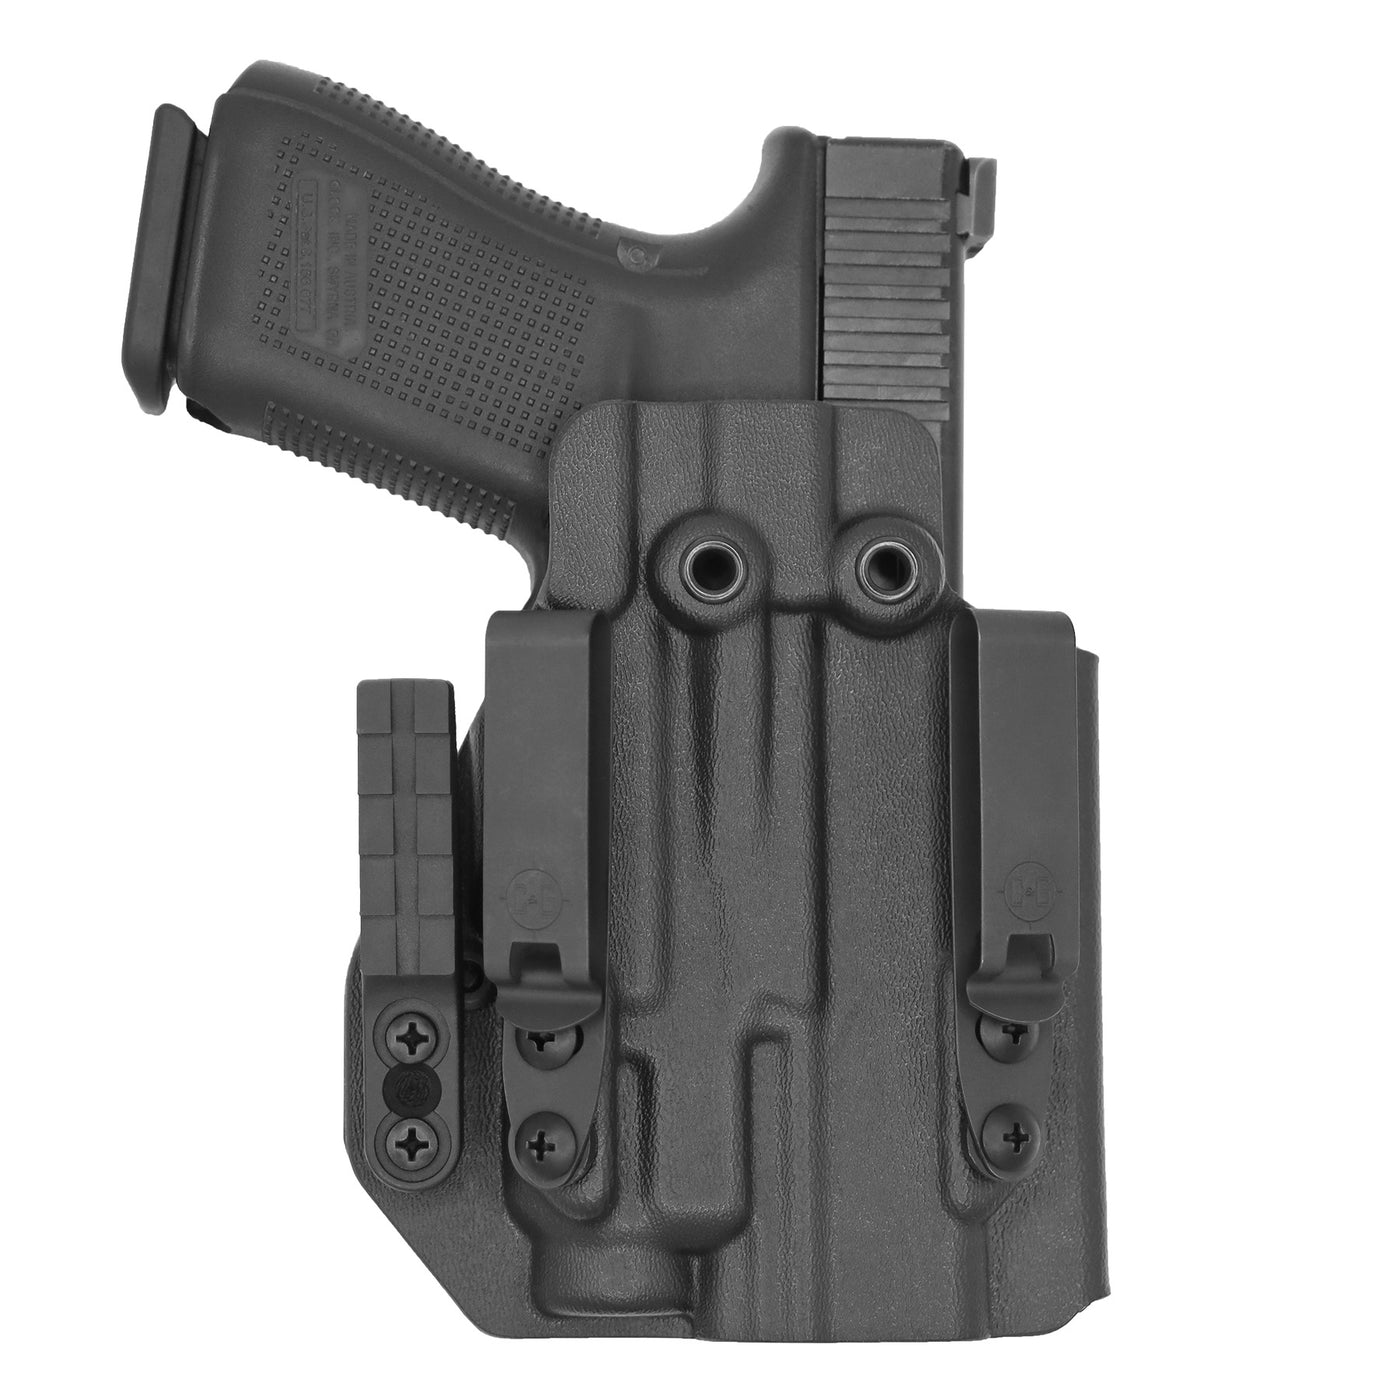 C&G Holsters custom IWB ALPHA UPGRADE Tactical OZ9/c streamlight tlr7/a in holstered position